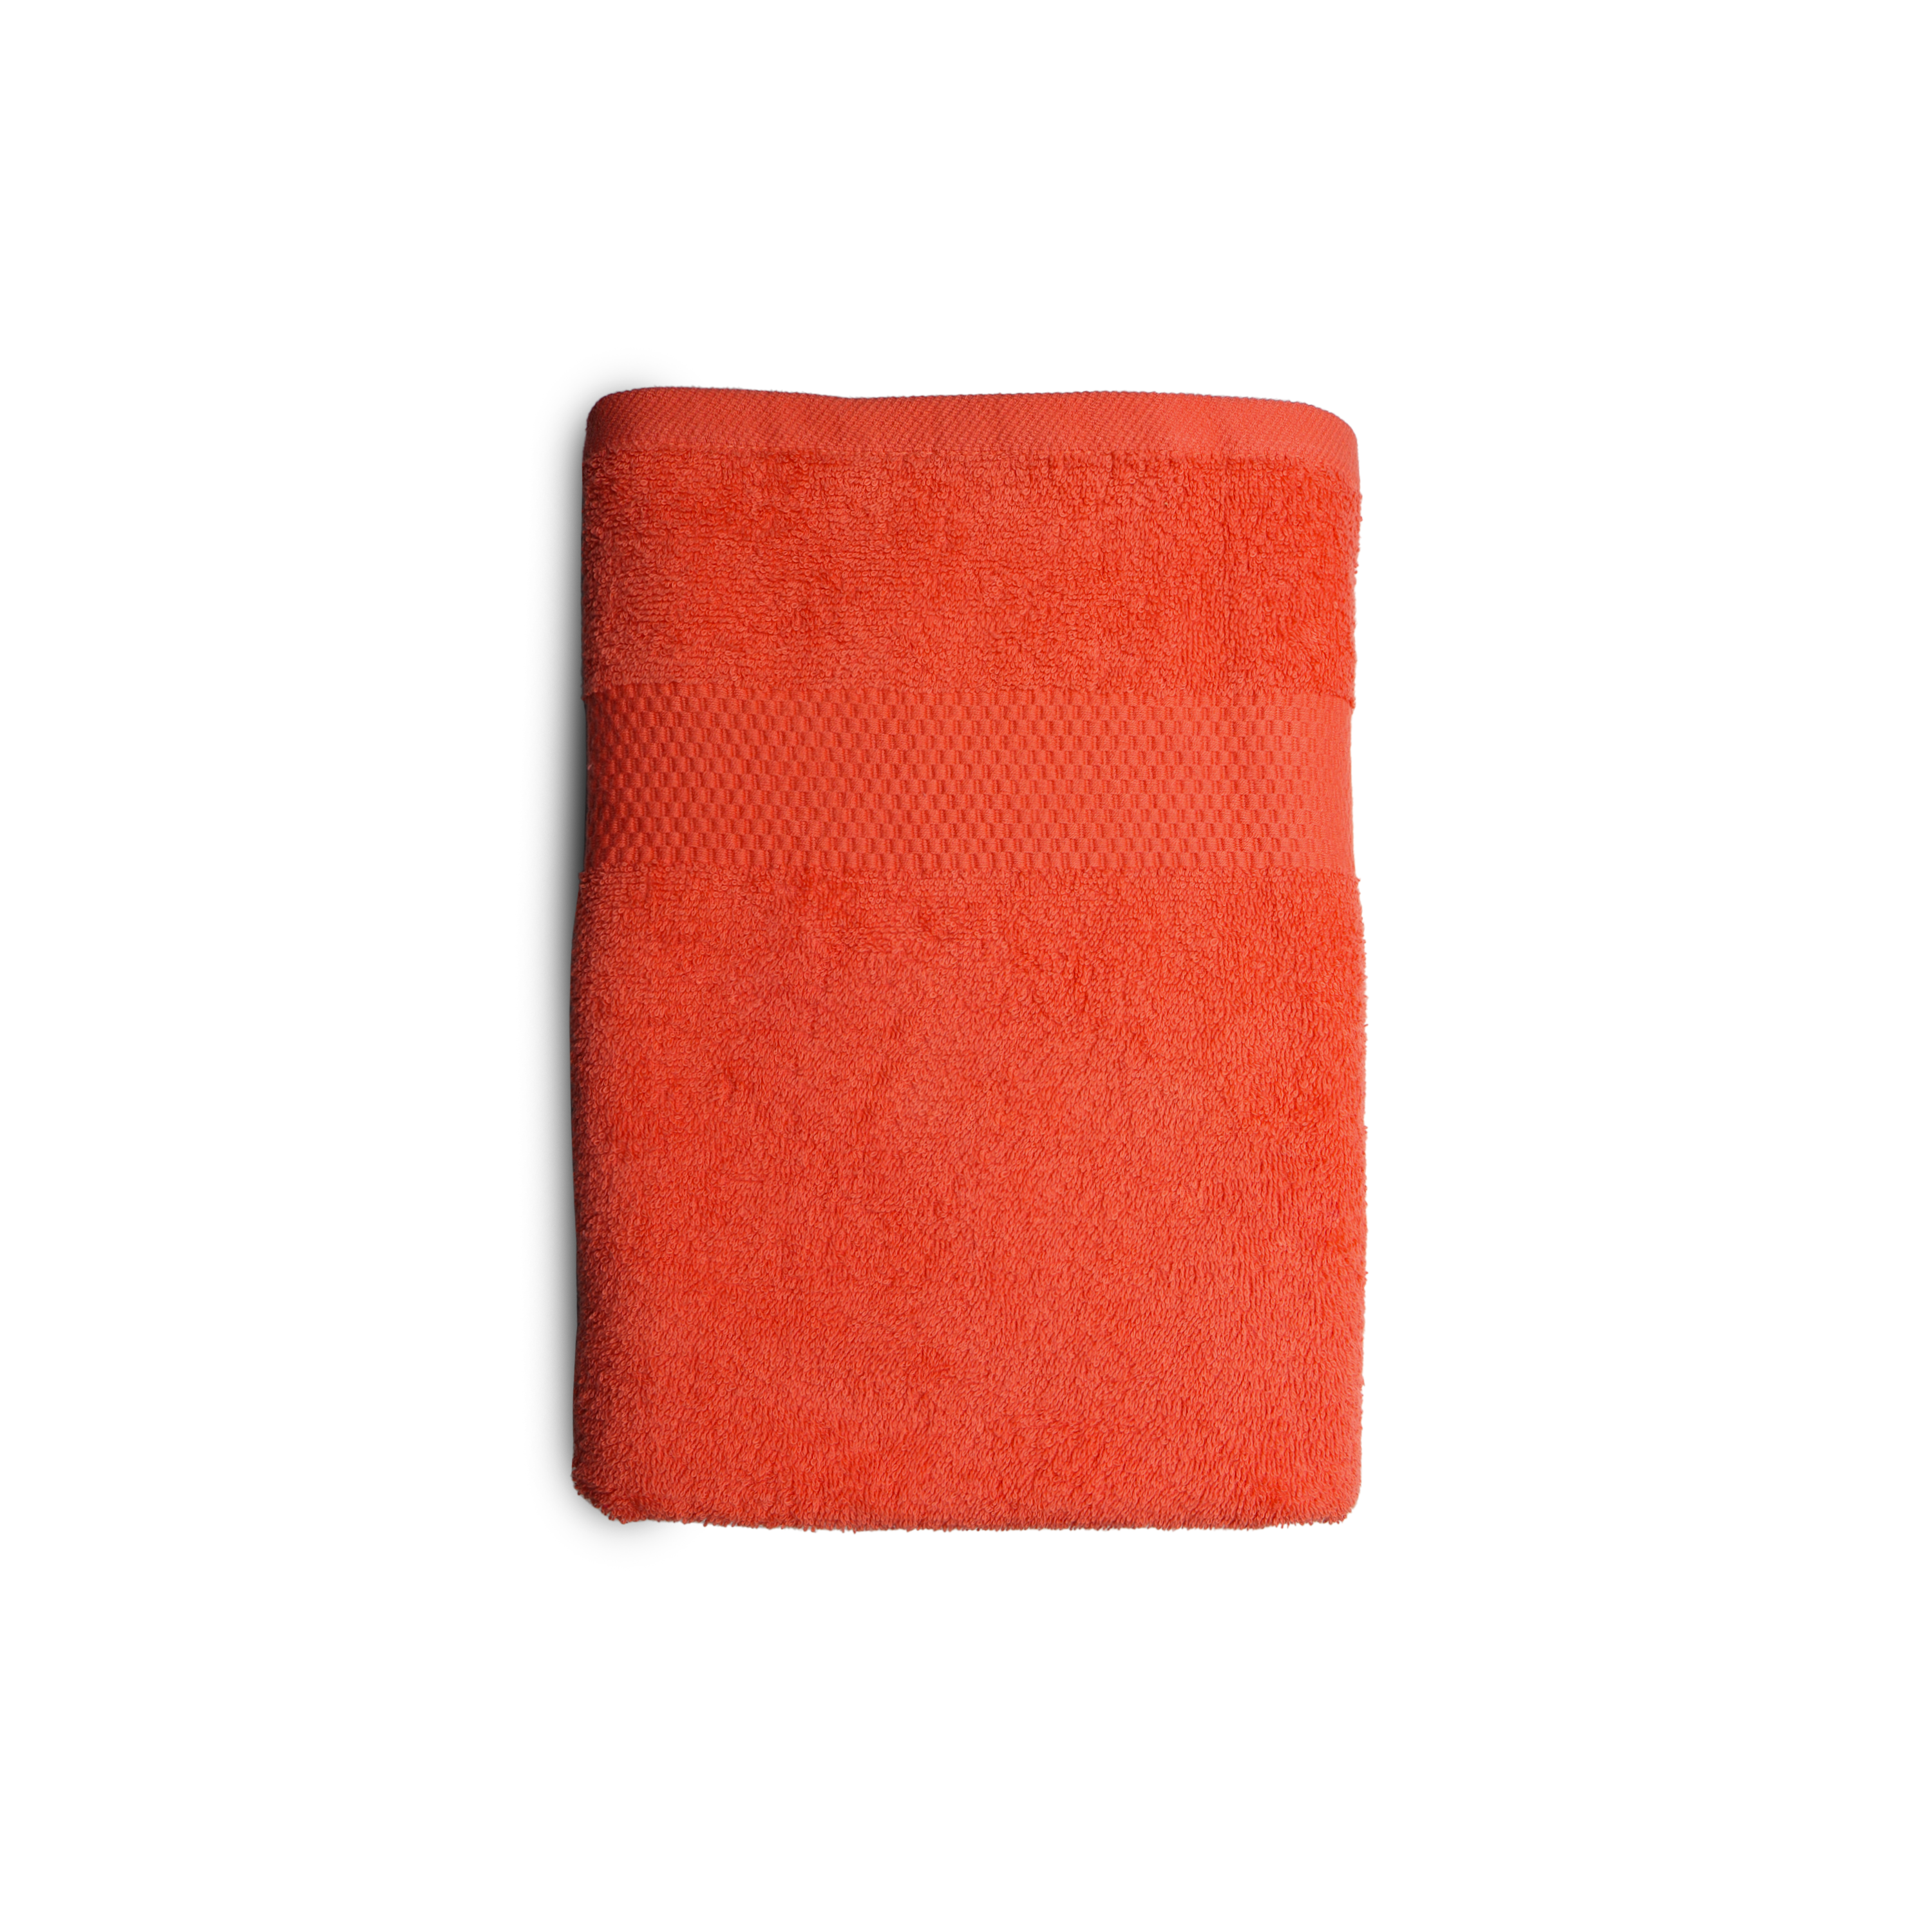 This bright orange color bath towel adds a pop of color to any bathroom or beach trip.